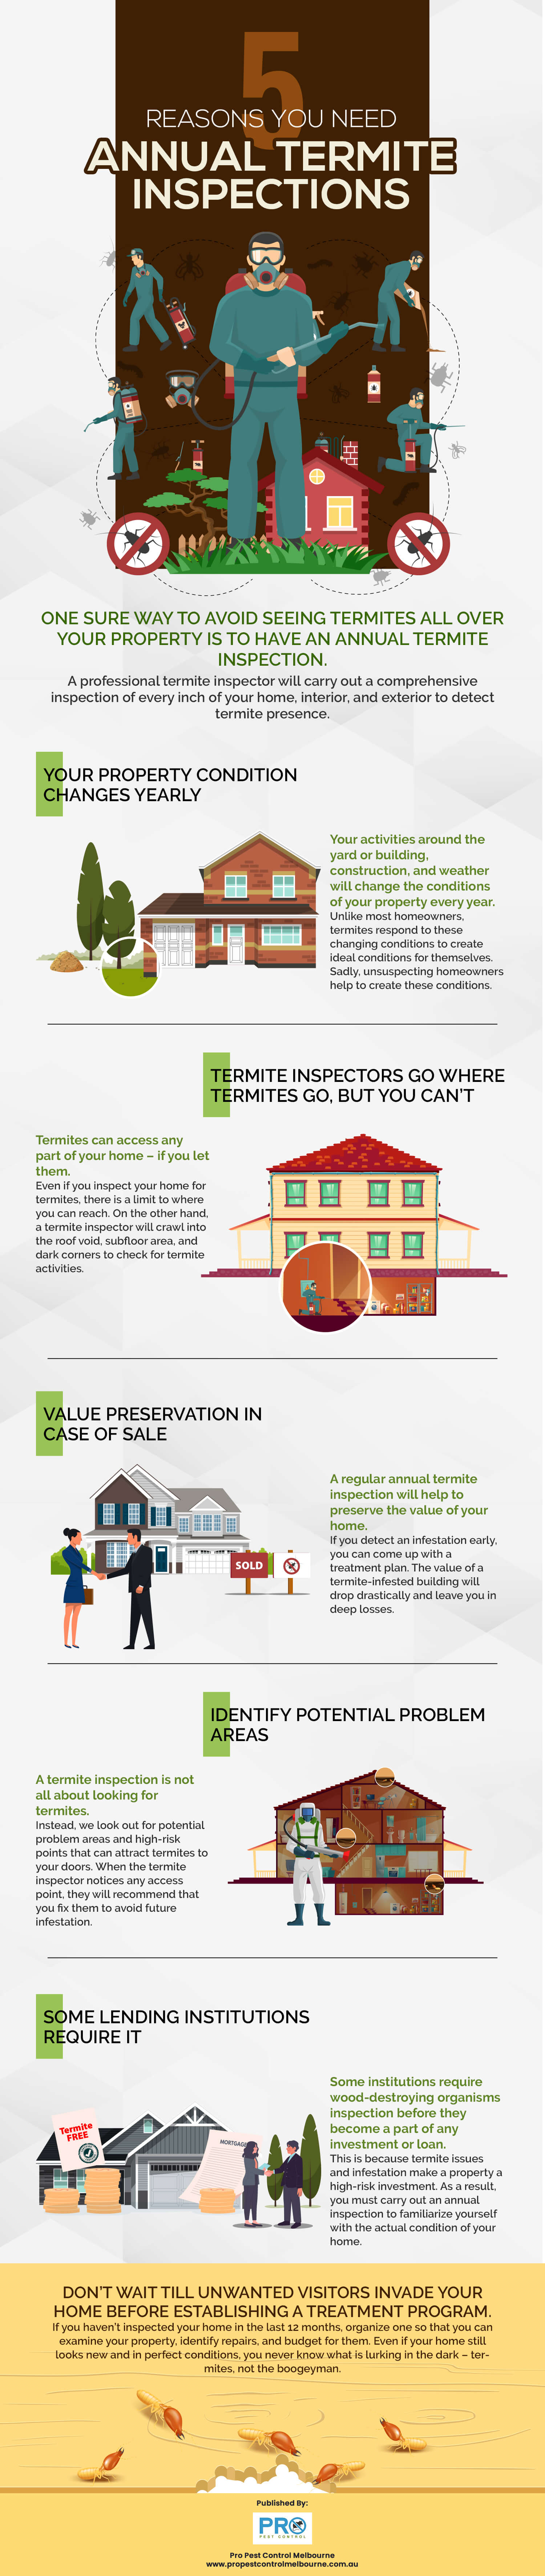 5 Reasons You Need Annual Termite Inspections  - Infographic